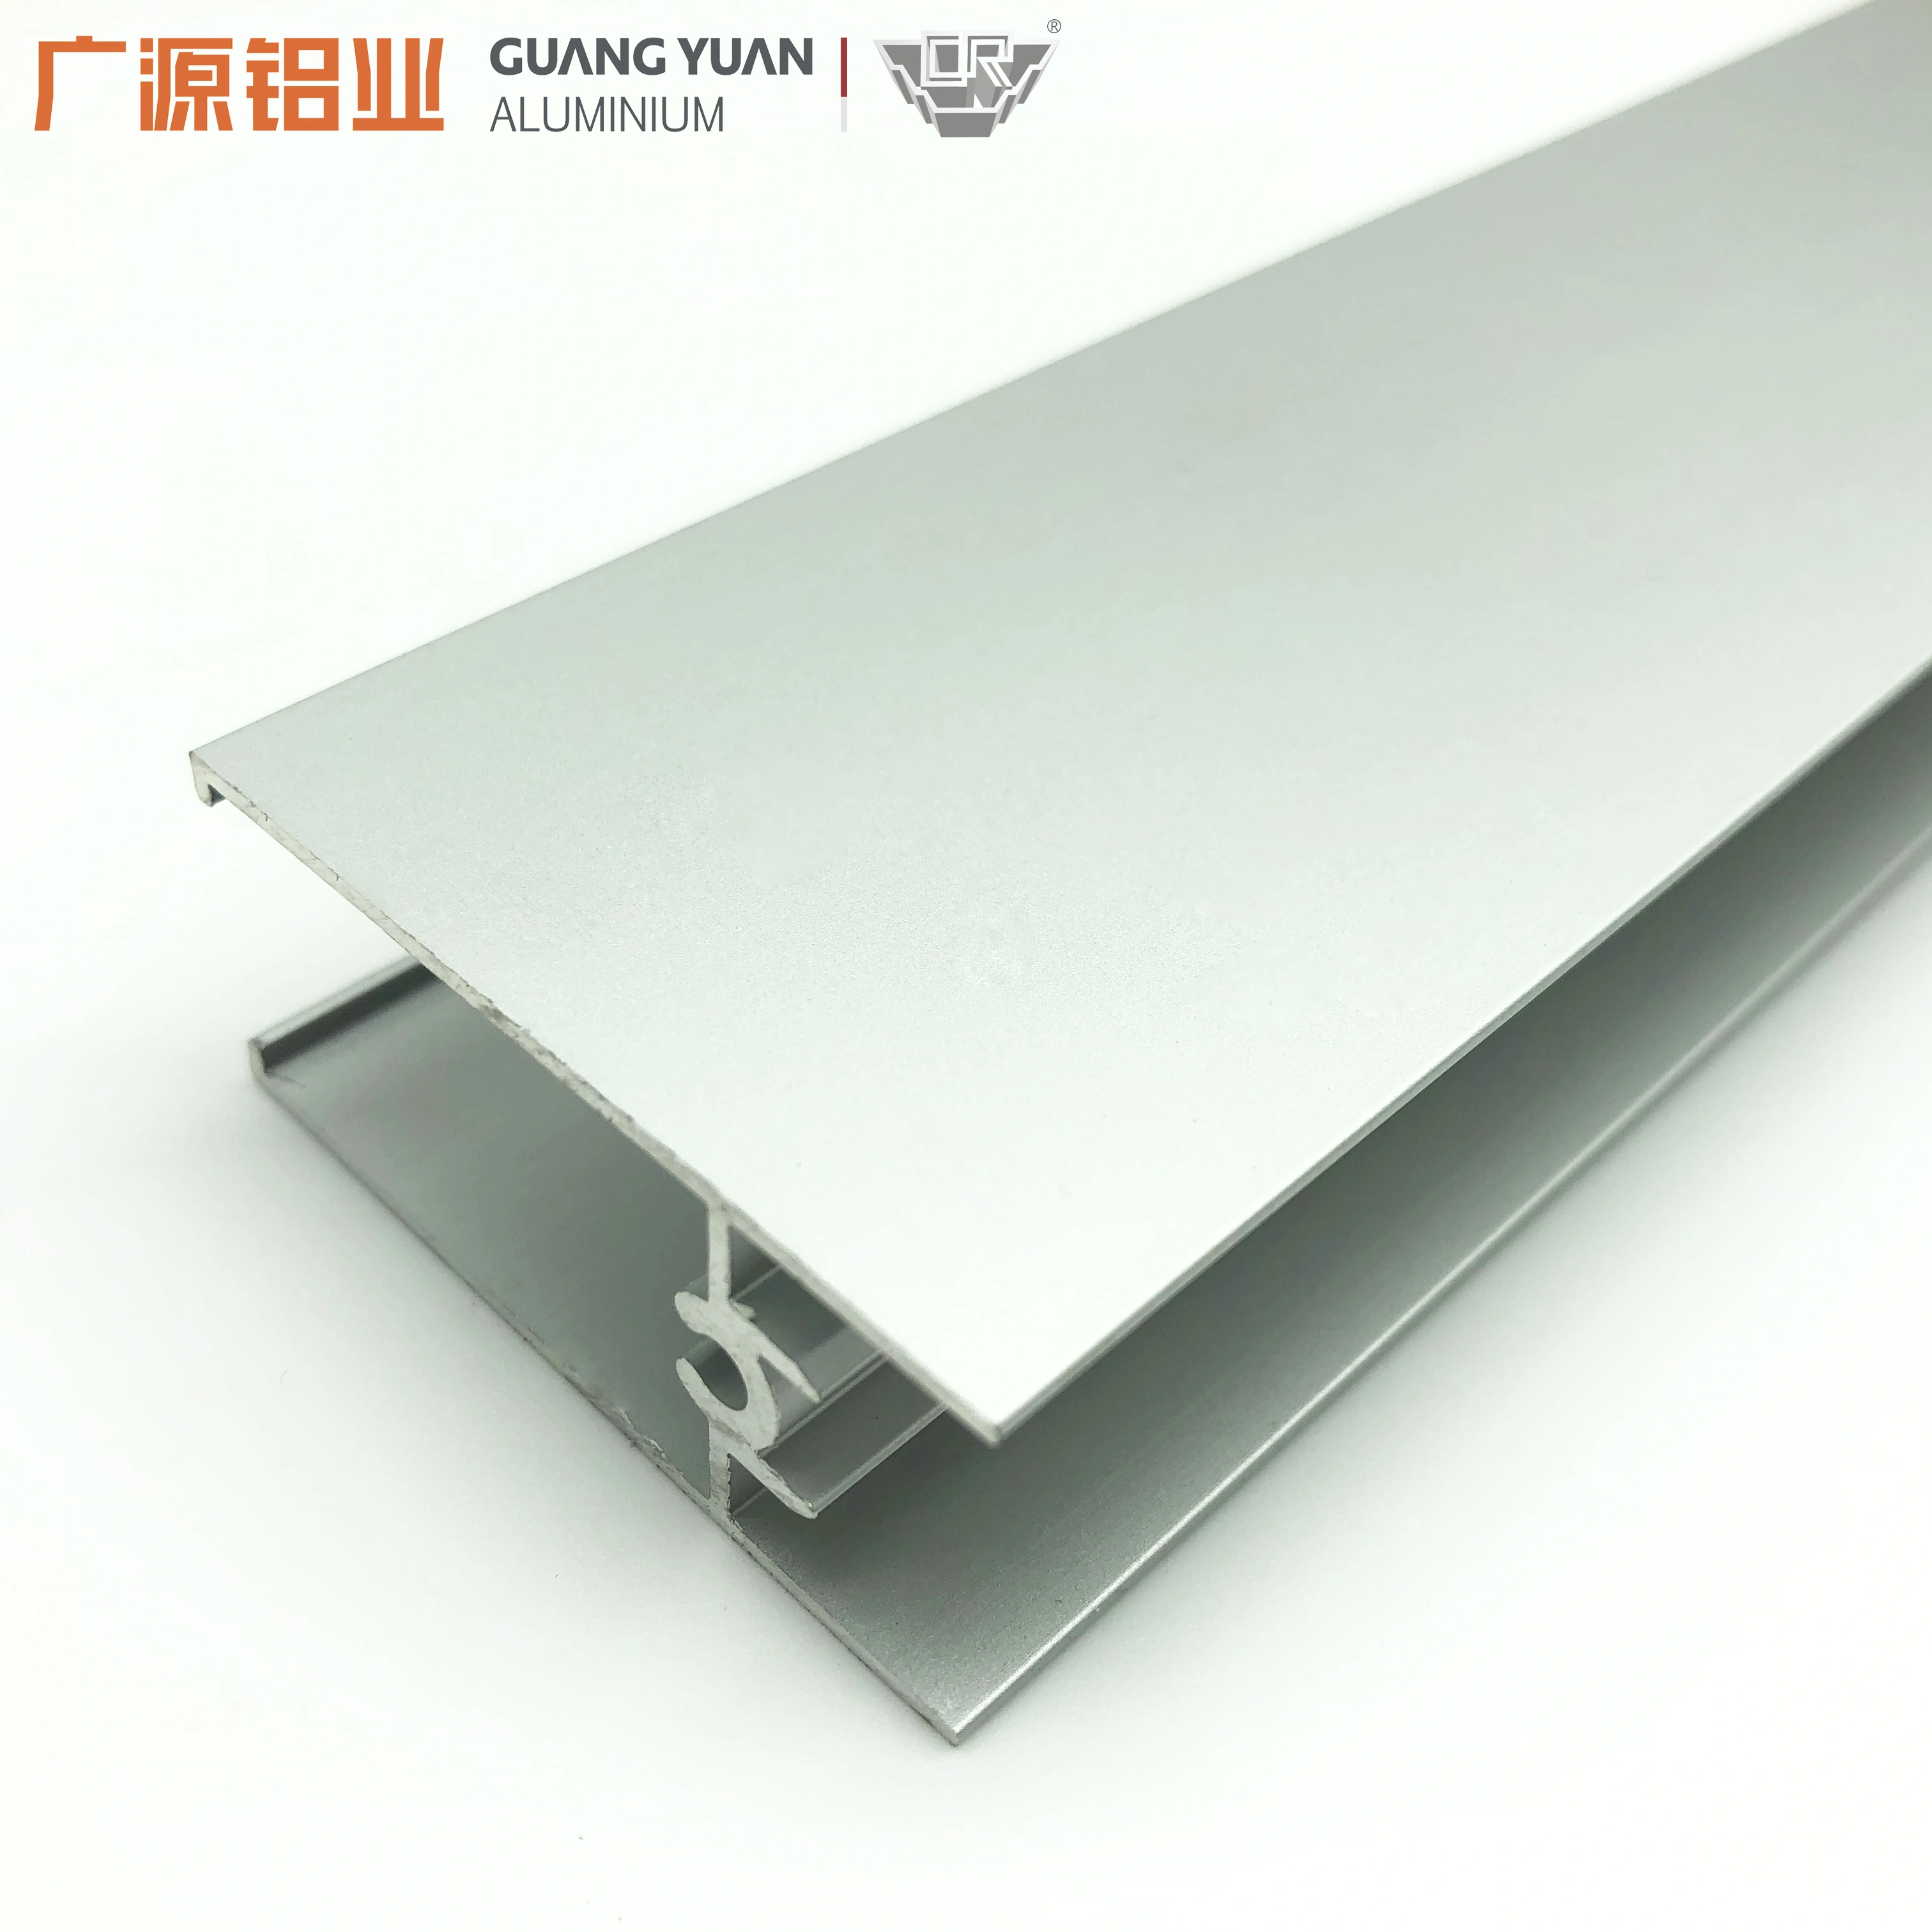 Aluminium U-profiles - Silver anodised ✓ Smooth surfaces ✓ Anodised AW 6063  T6 aluminium ✓ For indoor and outdoor use ✓ From 1 piece ✓